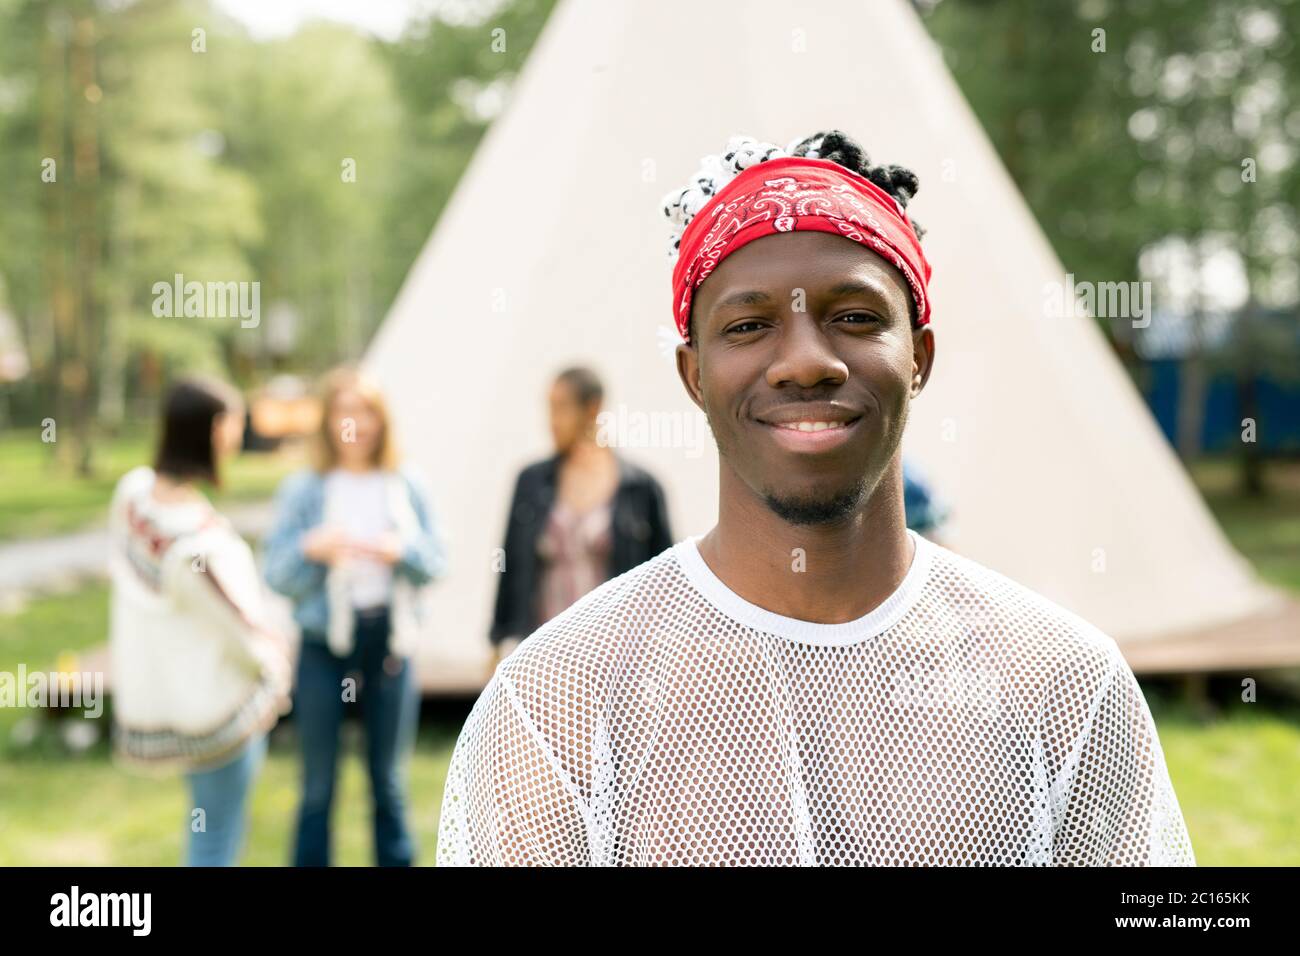 Portrait of smiling handsome young black man with beard wearing red bandana spending time at festival campsite Stock Photo